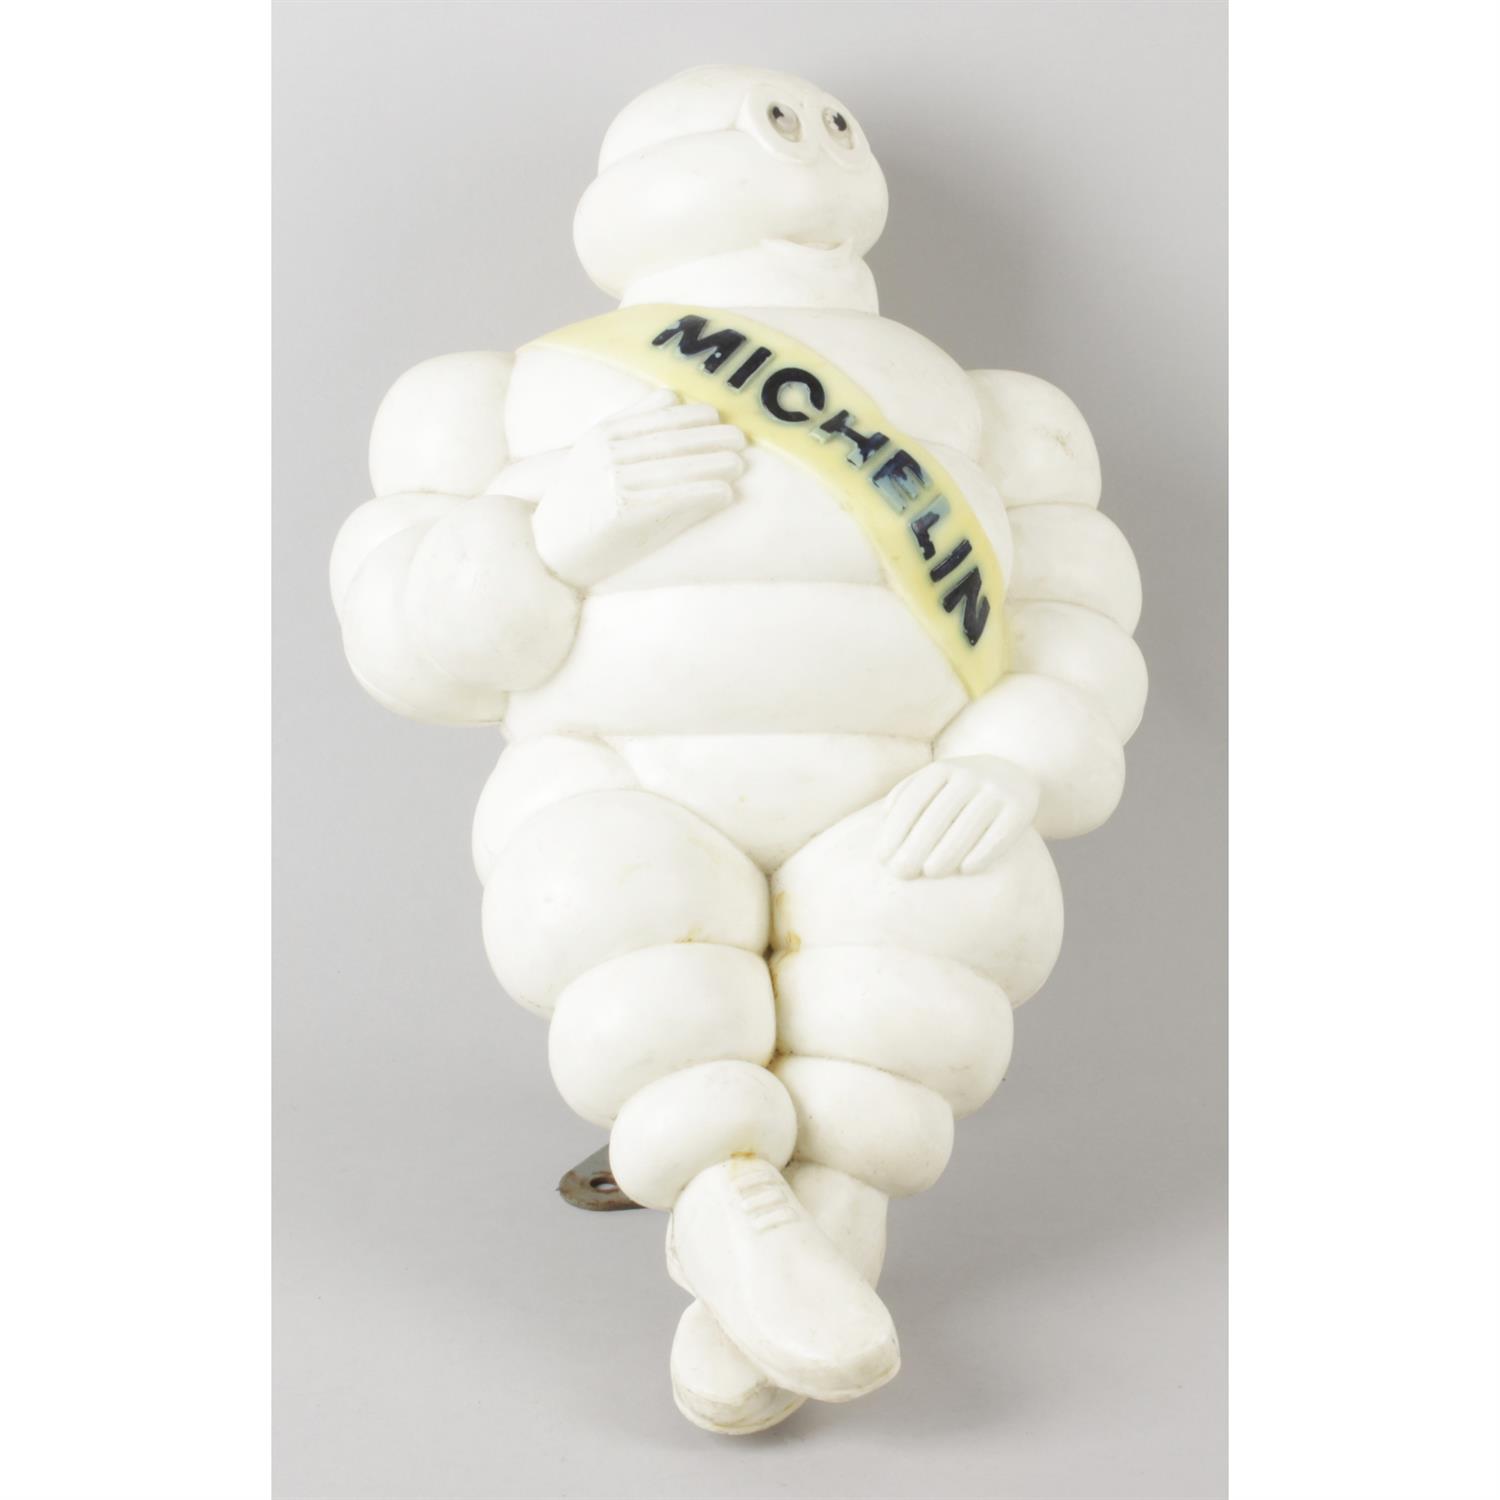 A large plastic model, modelled as The Michelin Man.